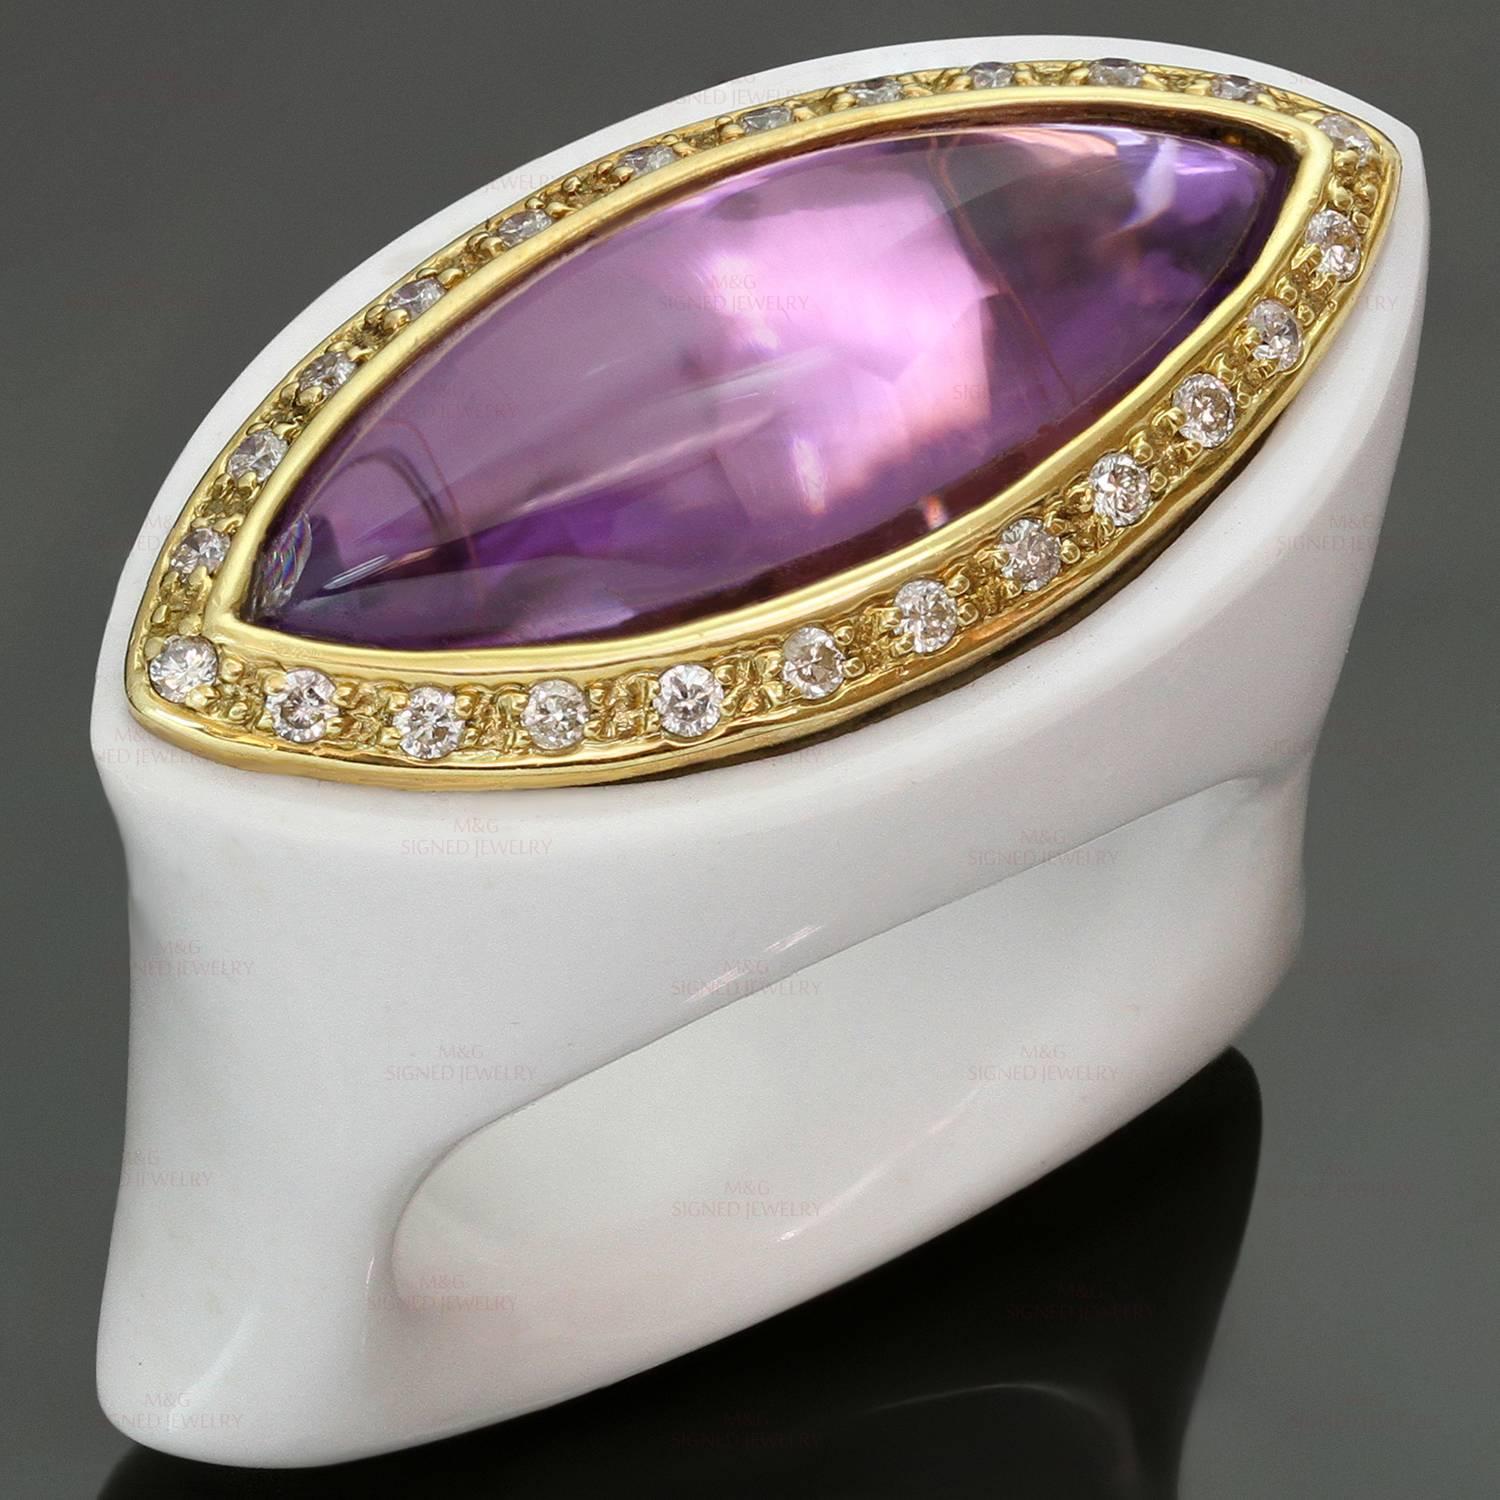 This fabulous cocktail ring features a chic design beautifully crafted in white agate  and set with a marquise-cut cabochon amethyst surrounded with brilliant-cut round diamonds set in 18k yellow gold. Made in Italy circa 2010s. Measurements: